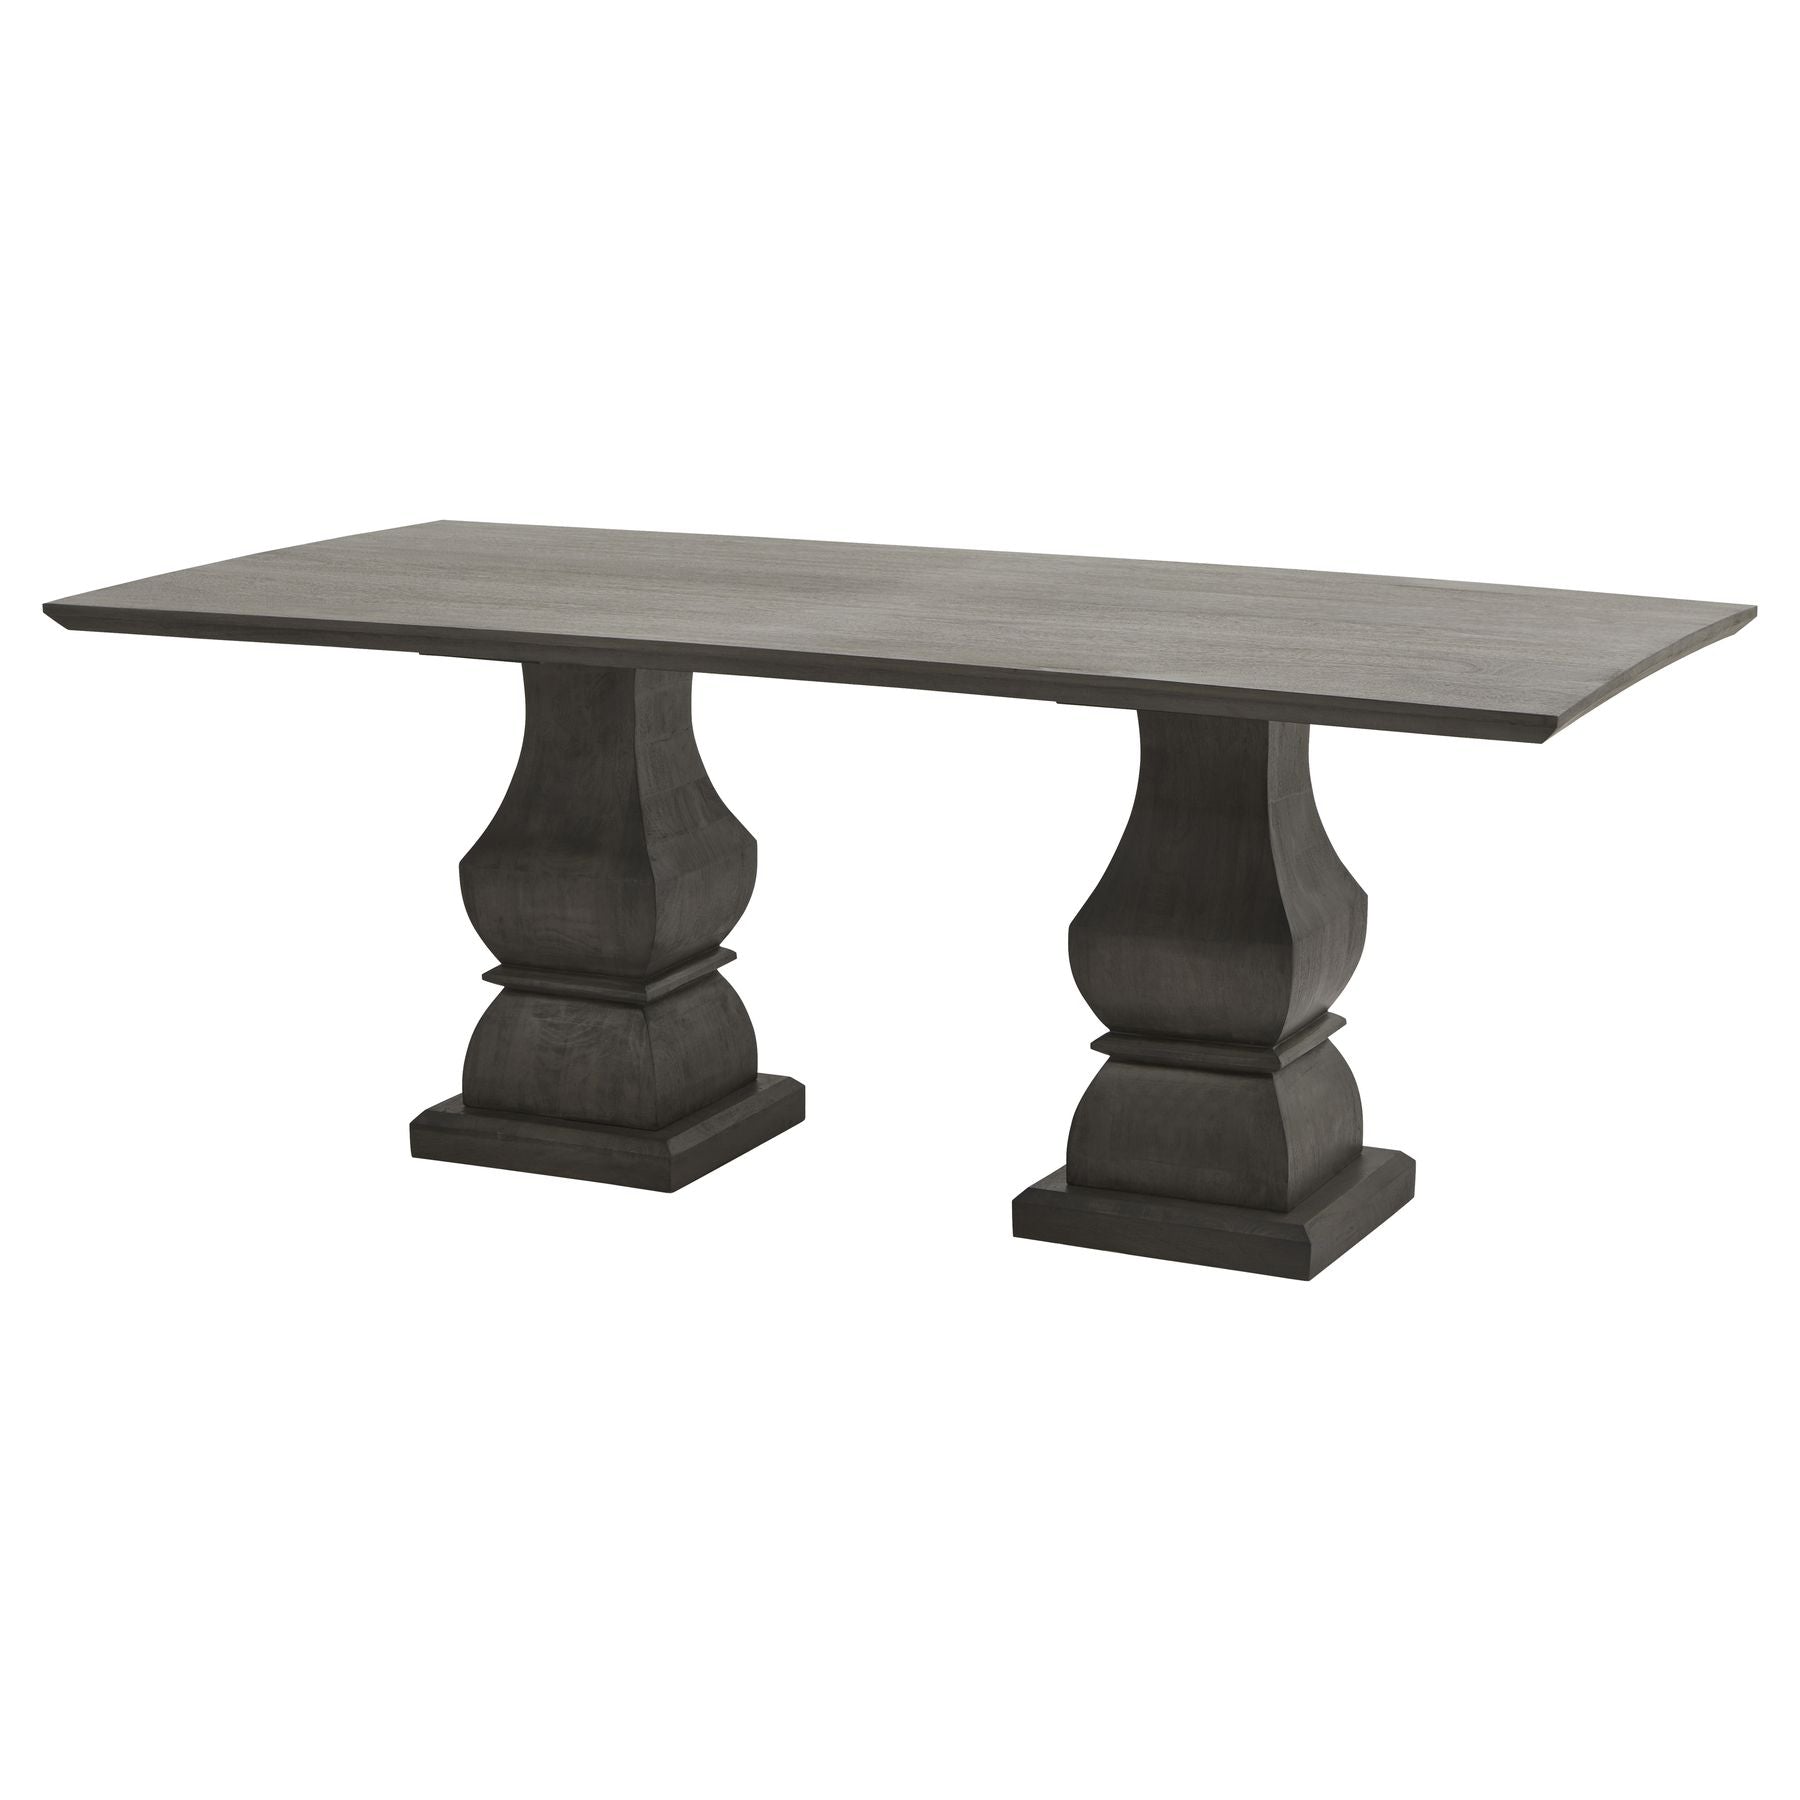 View Lucia Collection Dining Table information